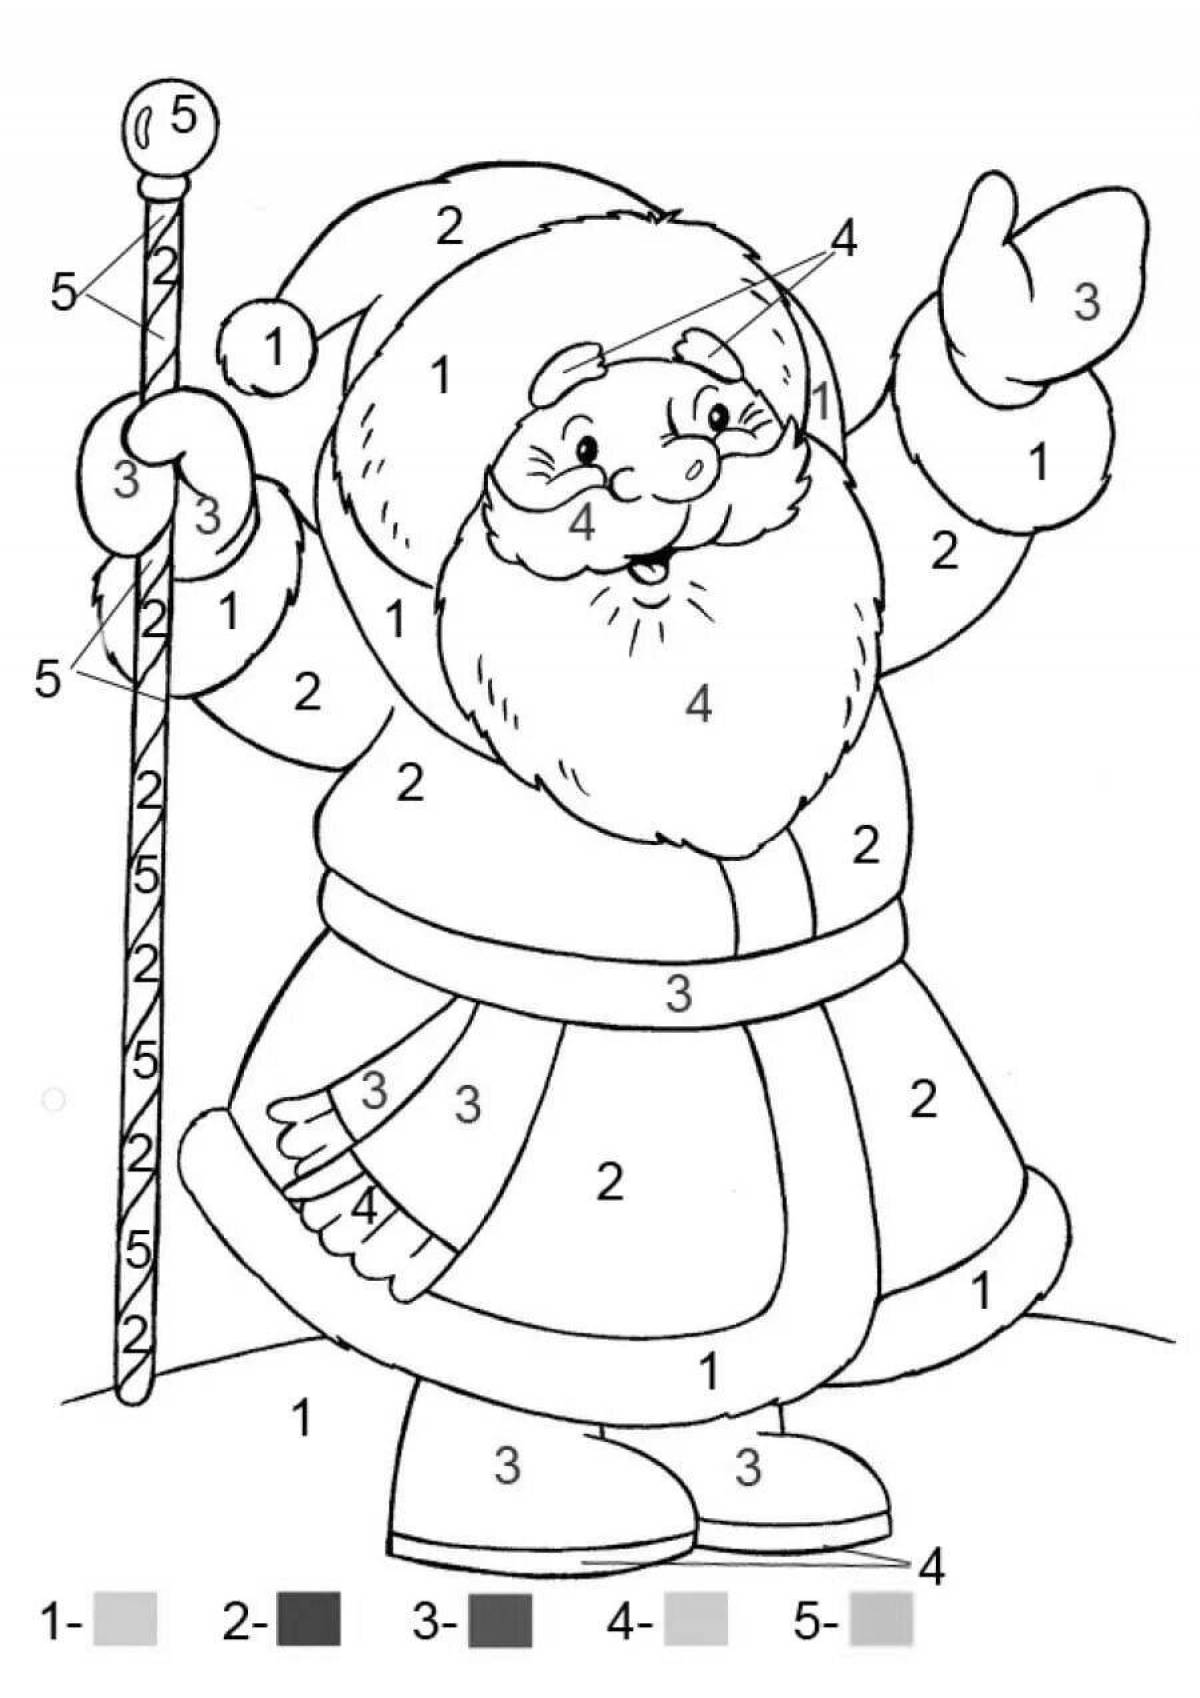 Glowing snow maiden coloring by numbers